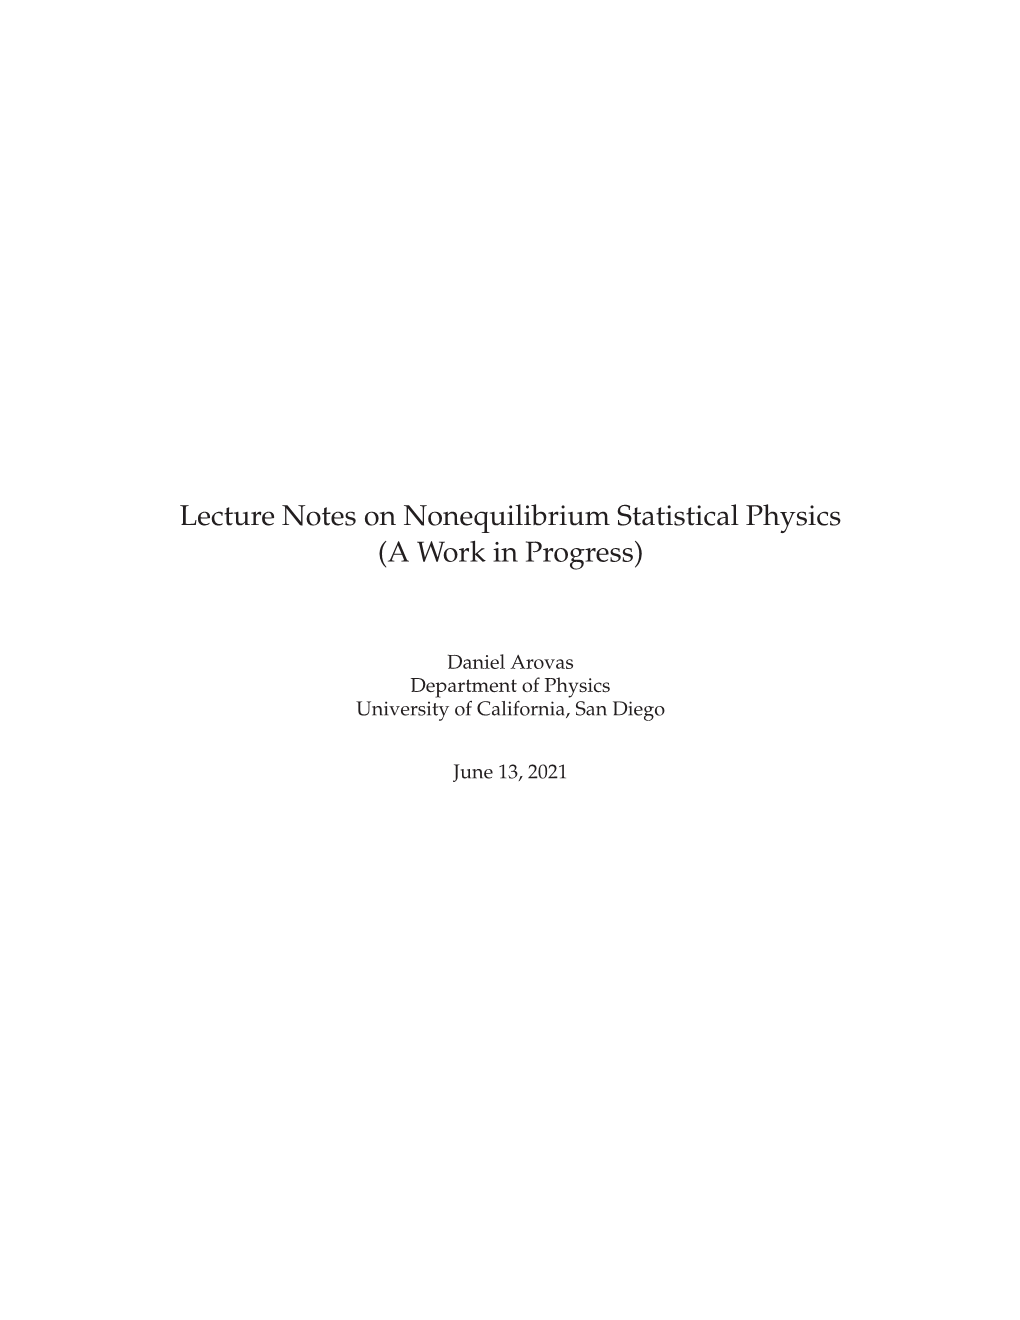 Lecture Notes on Nonequilibrium Statistical Physics (A Work in Progress)